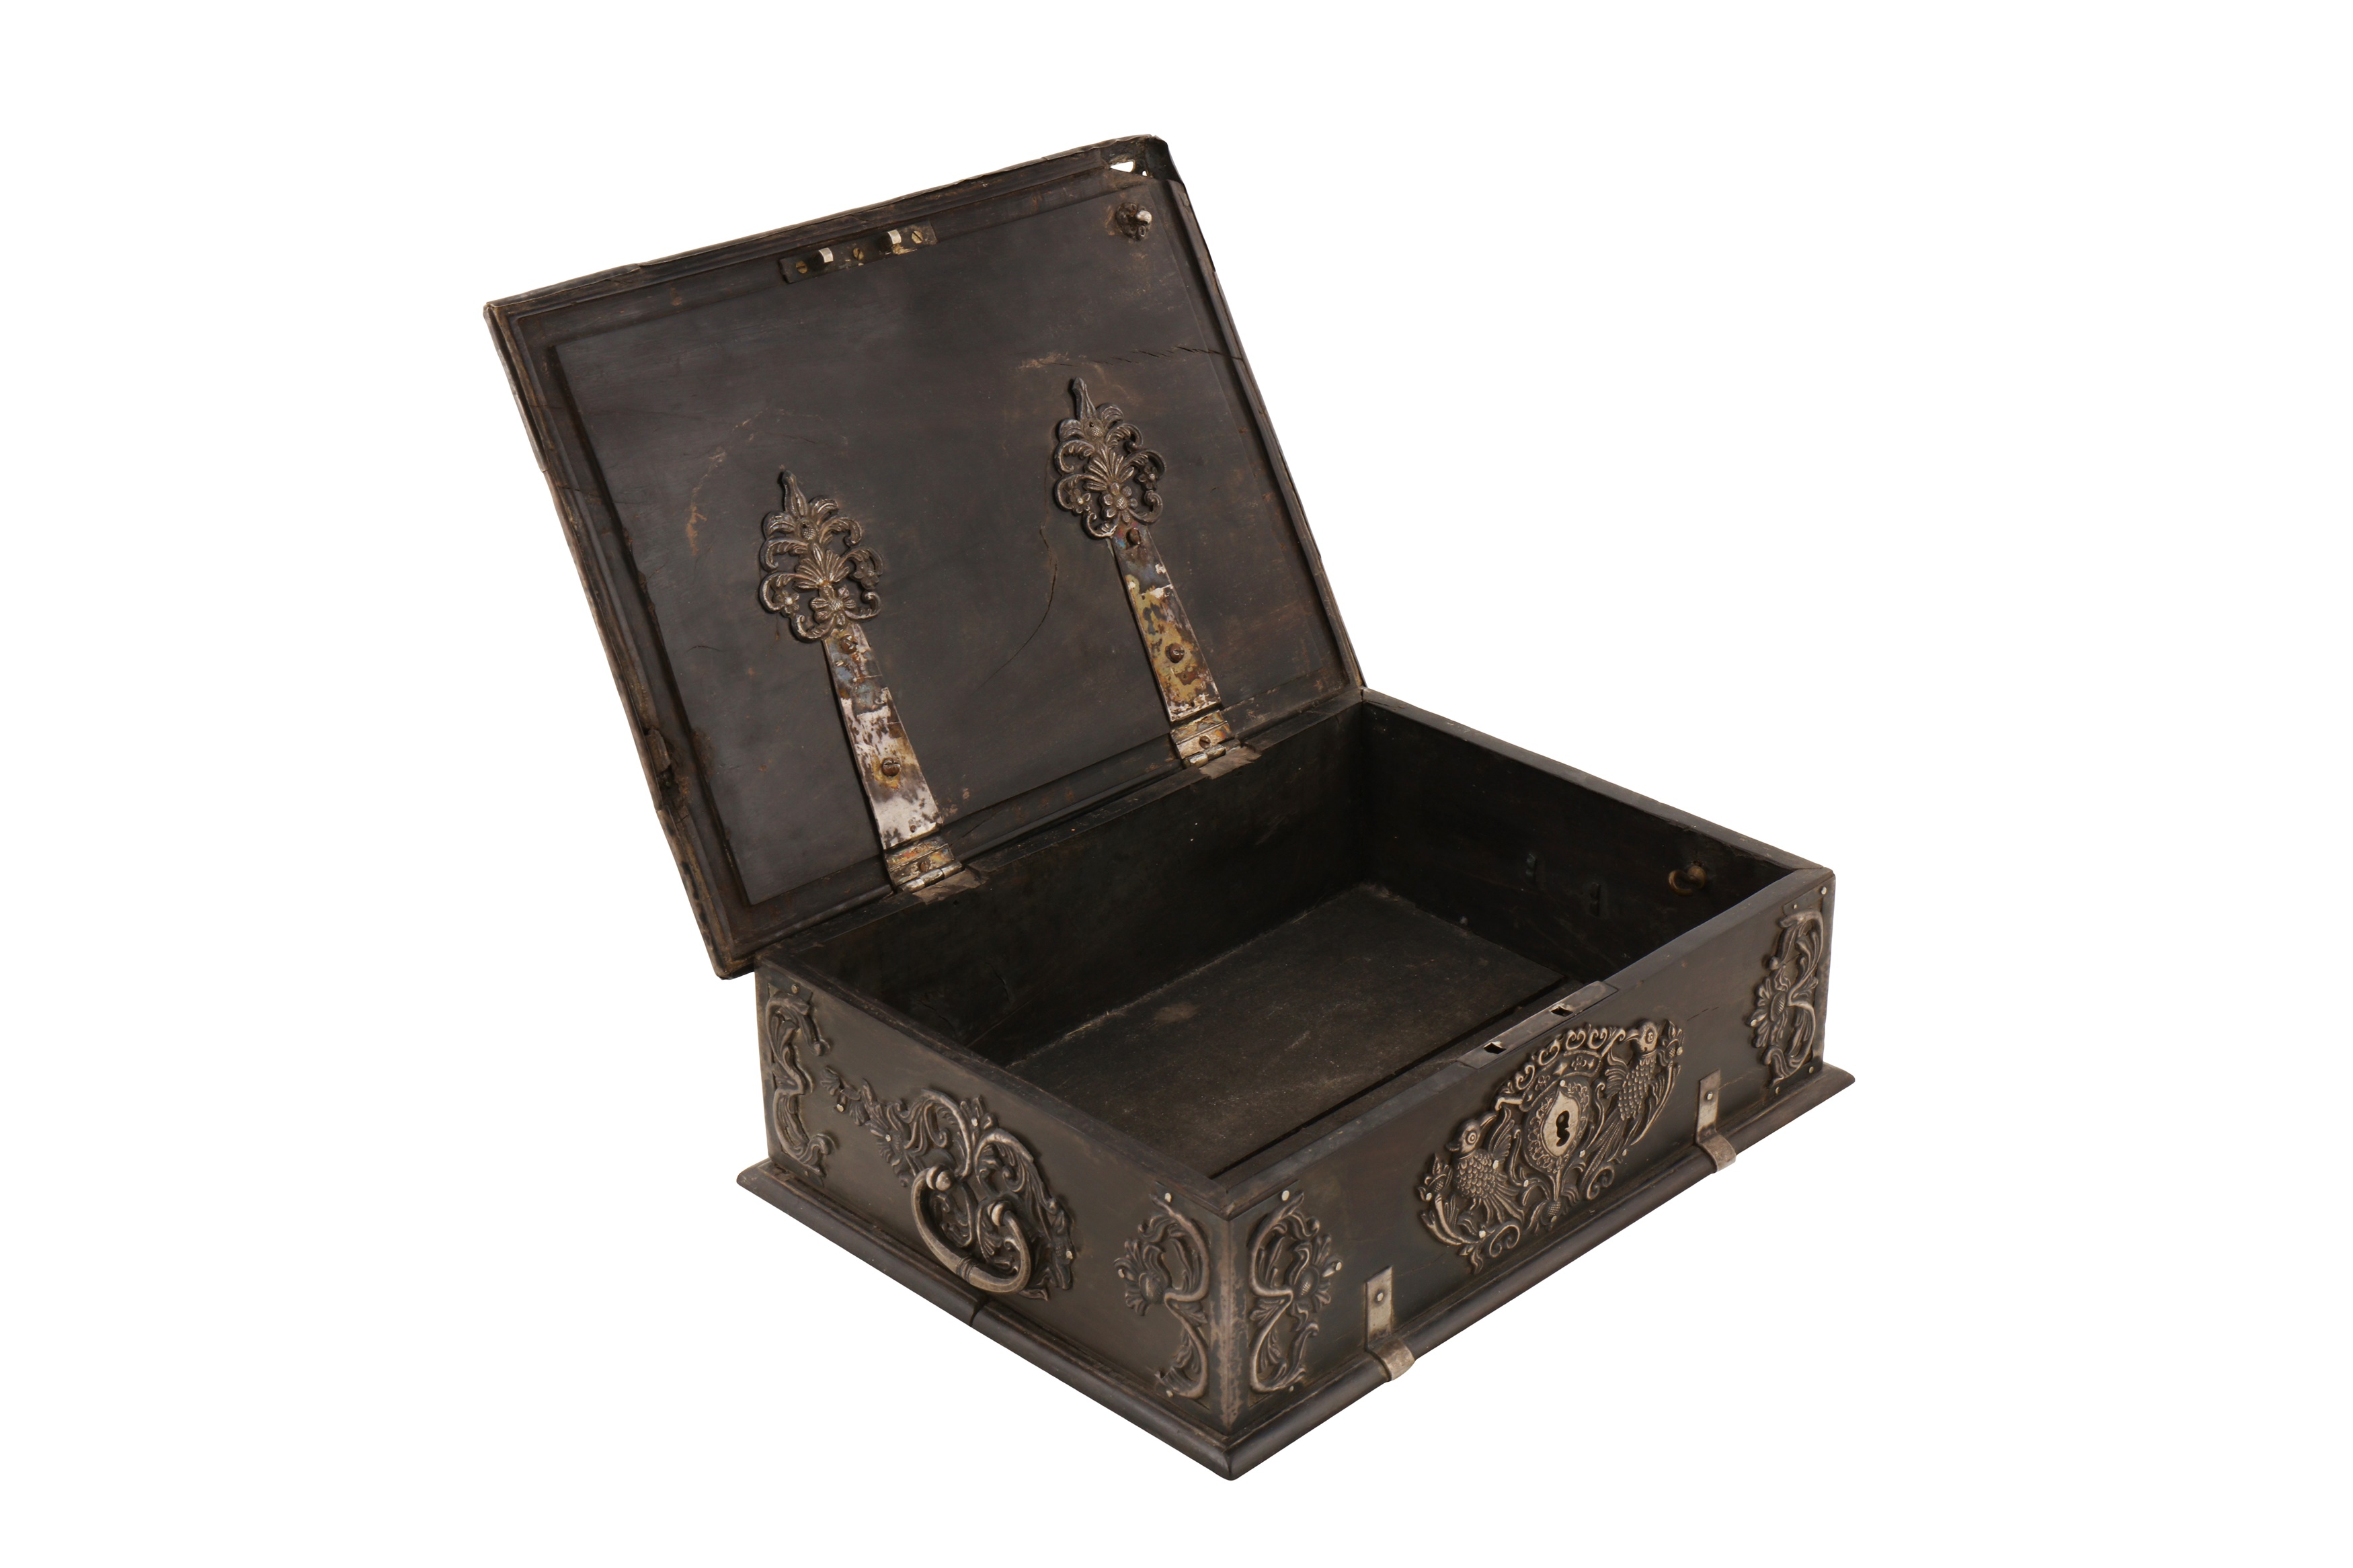 AN 18TH CENTURY DUTCH COLONIAL SINHALESE SILVER MOUNTED EBONY BOX OR CASKET - Image 5 of 6